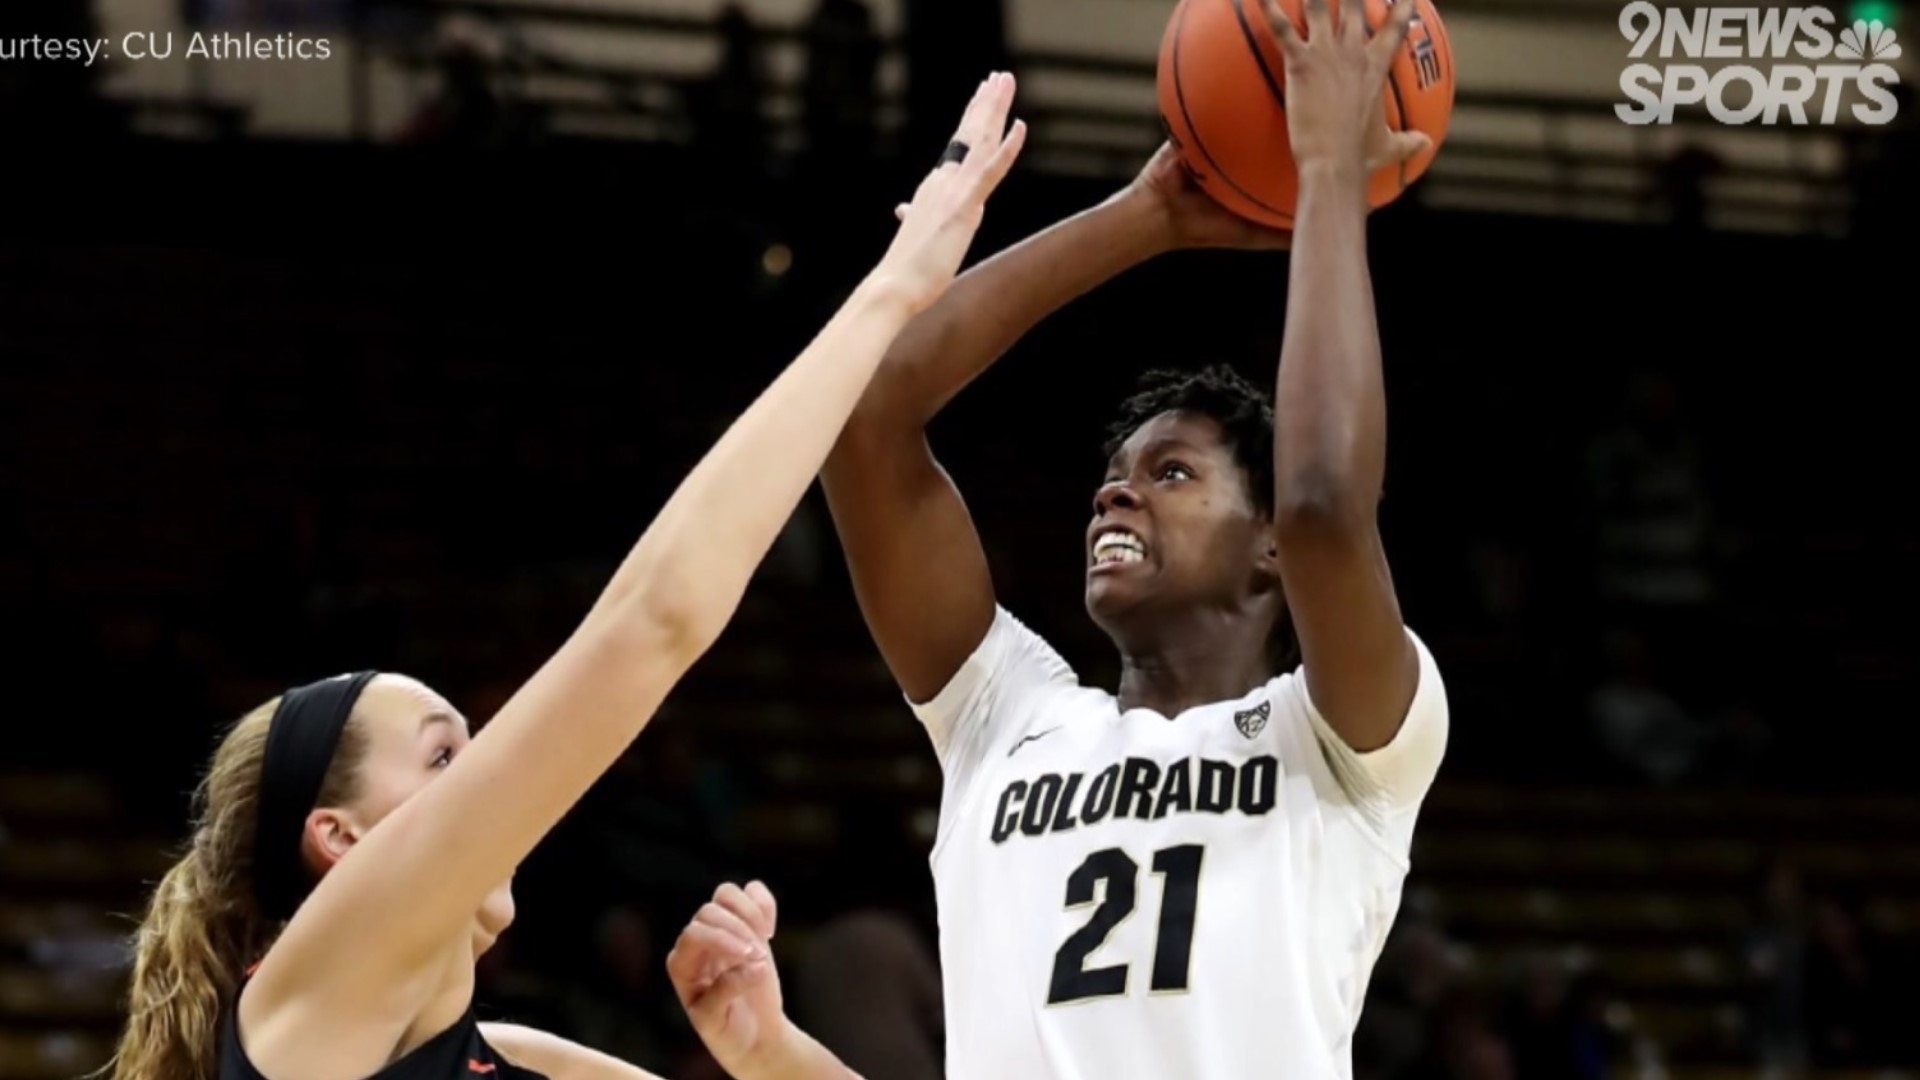 The Buffs forward has decided to put WNBA interest on hold to return to Colorado for one more season.